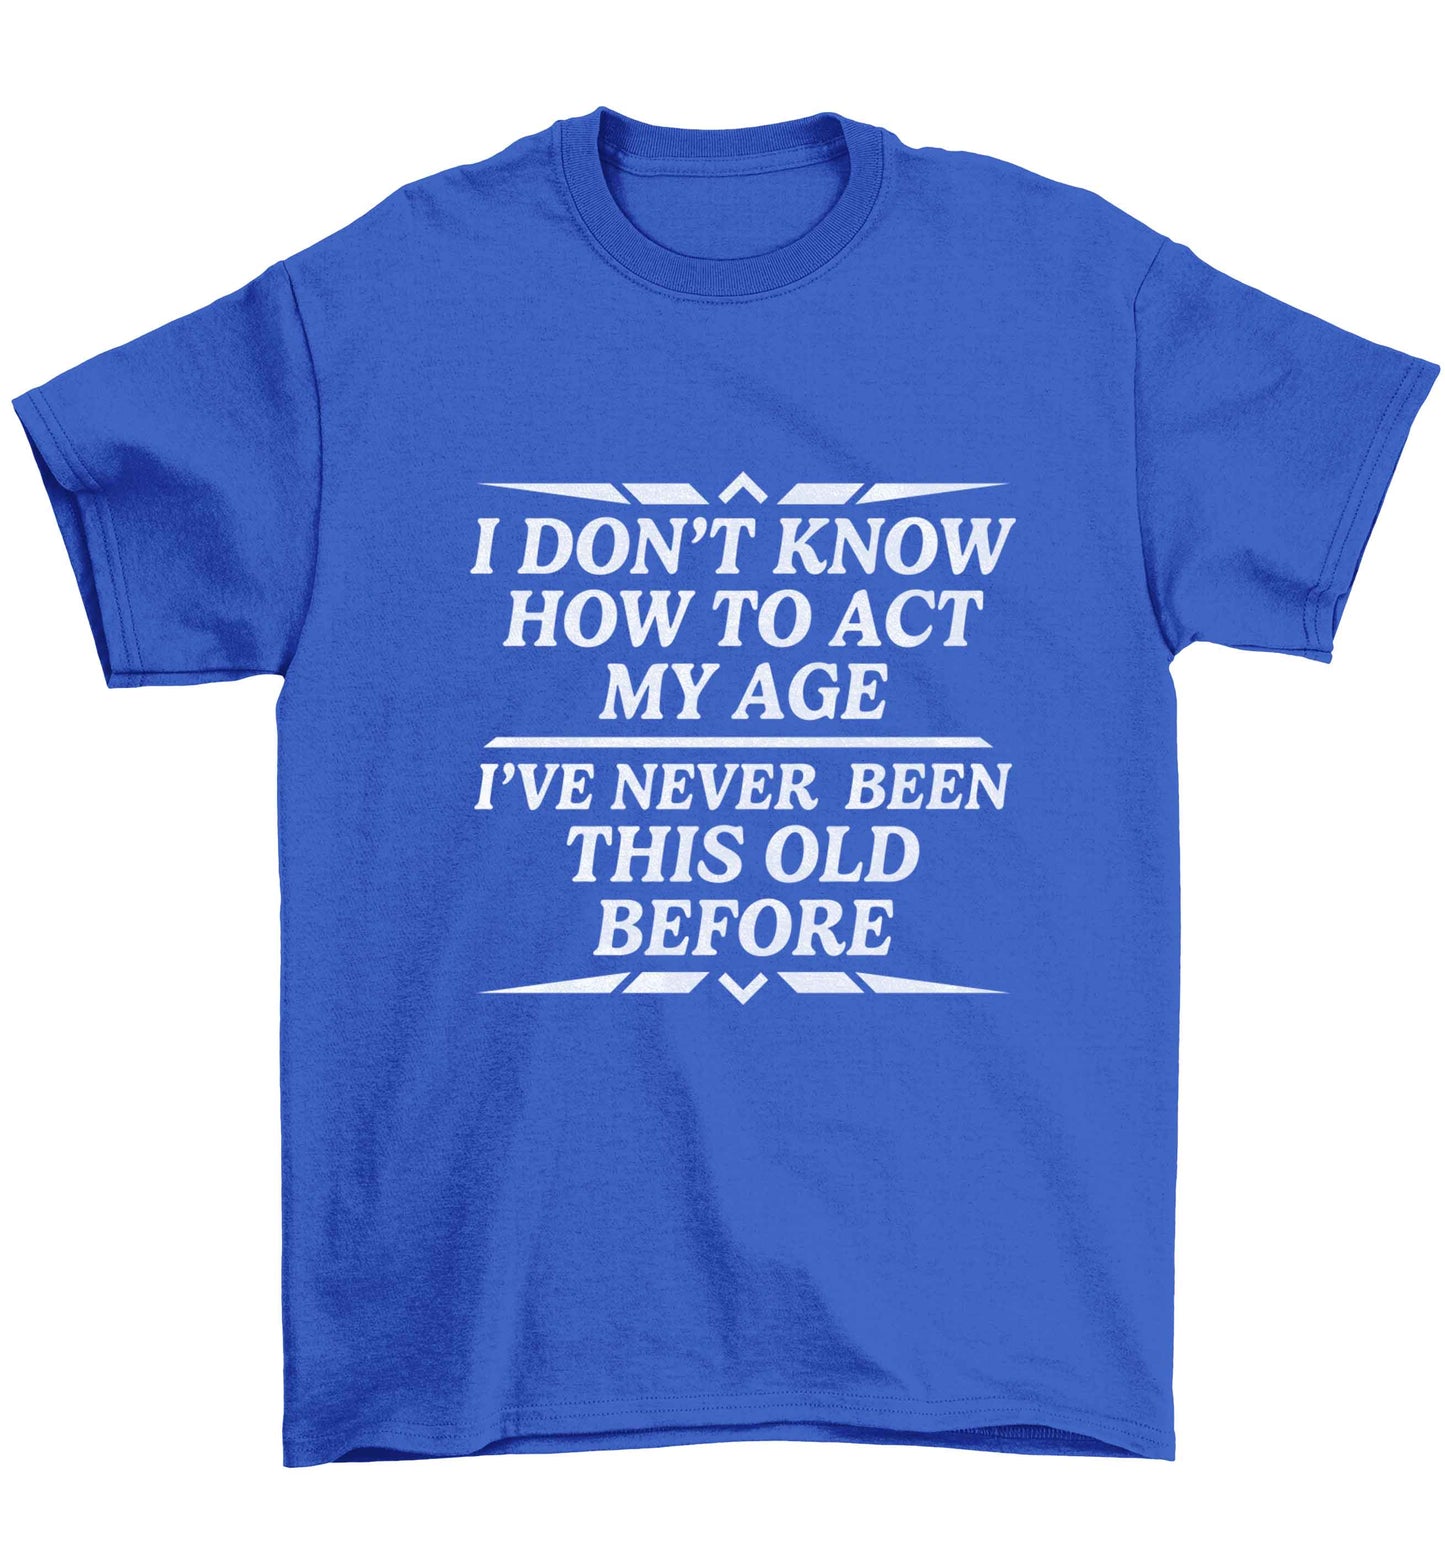 I don't know how to act my age I've never been this old before Children's blue Tshirt 12-13 Years